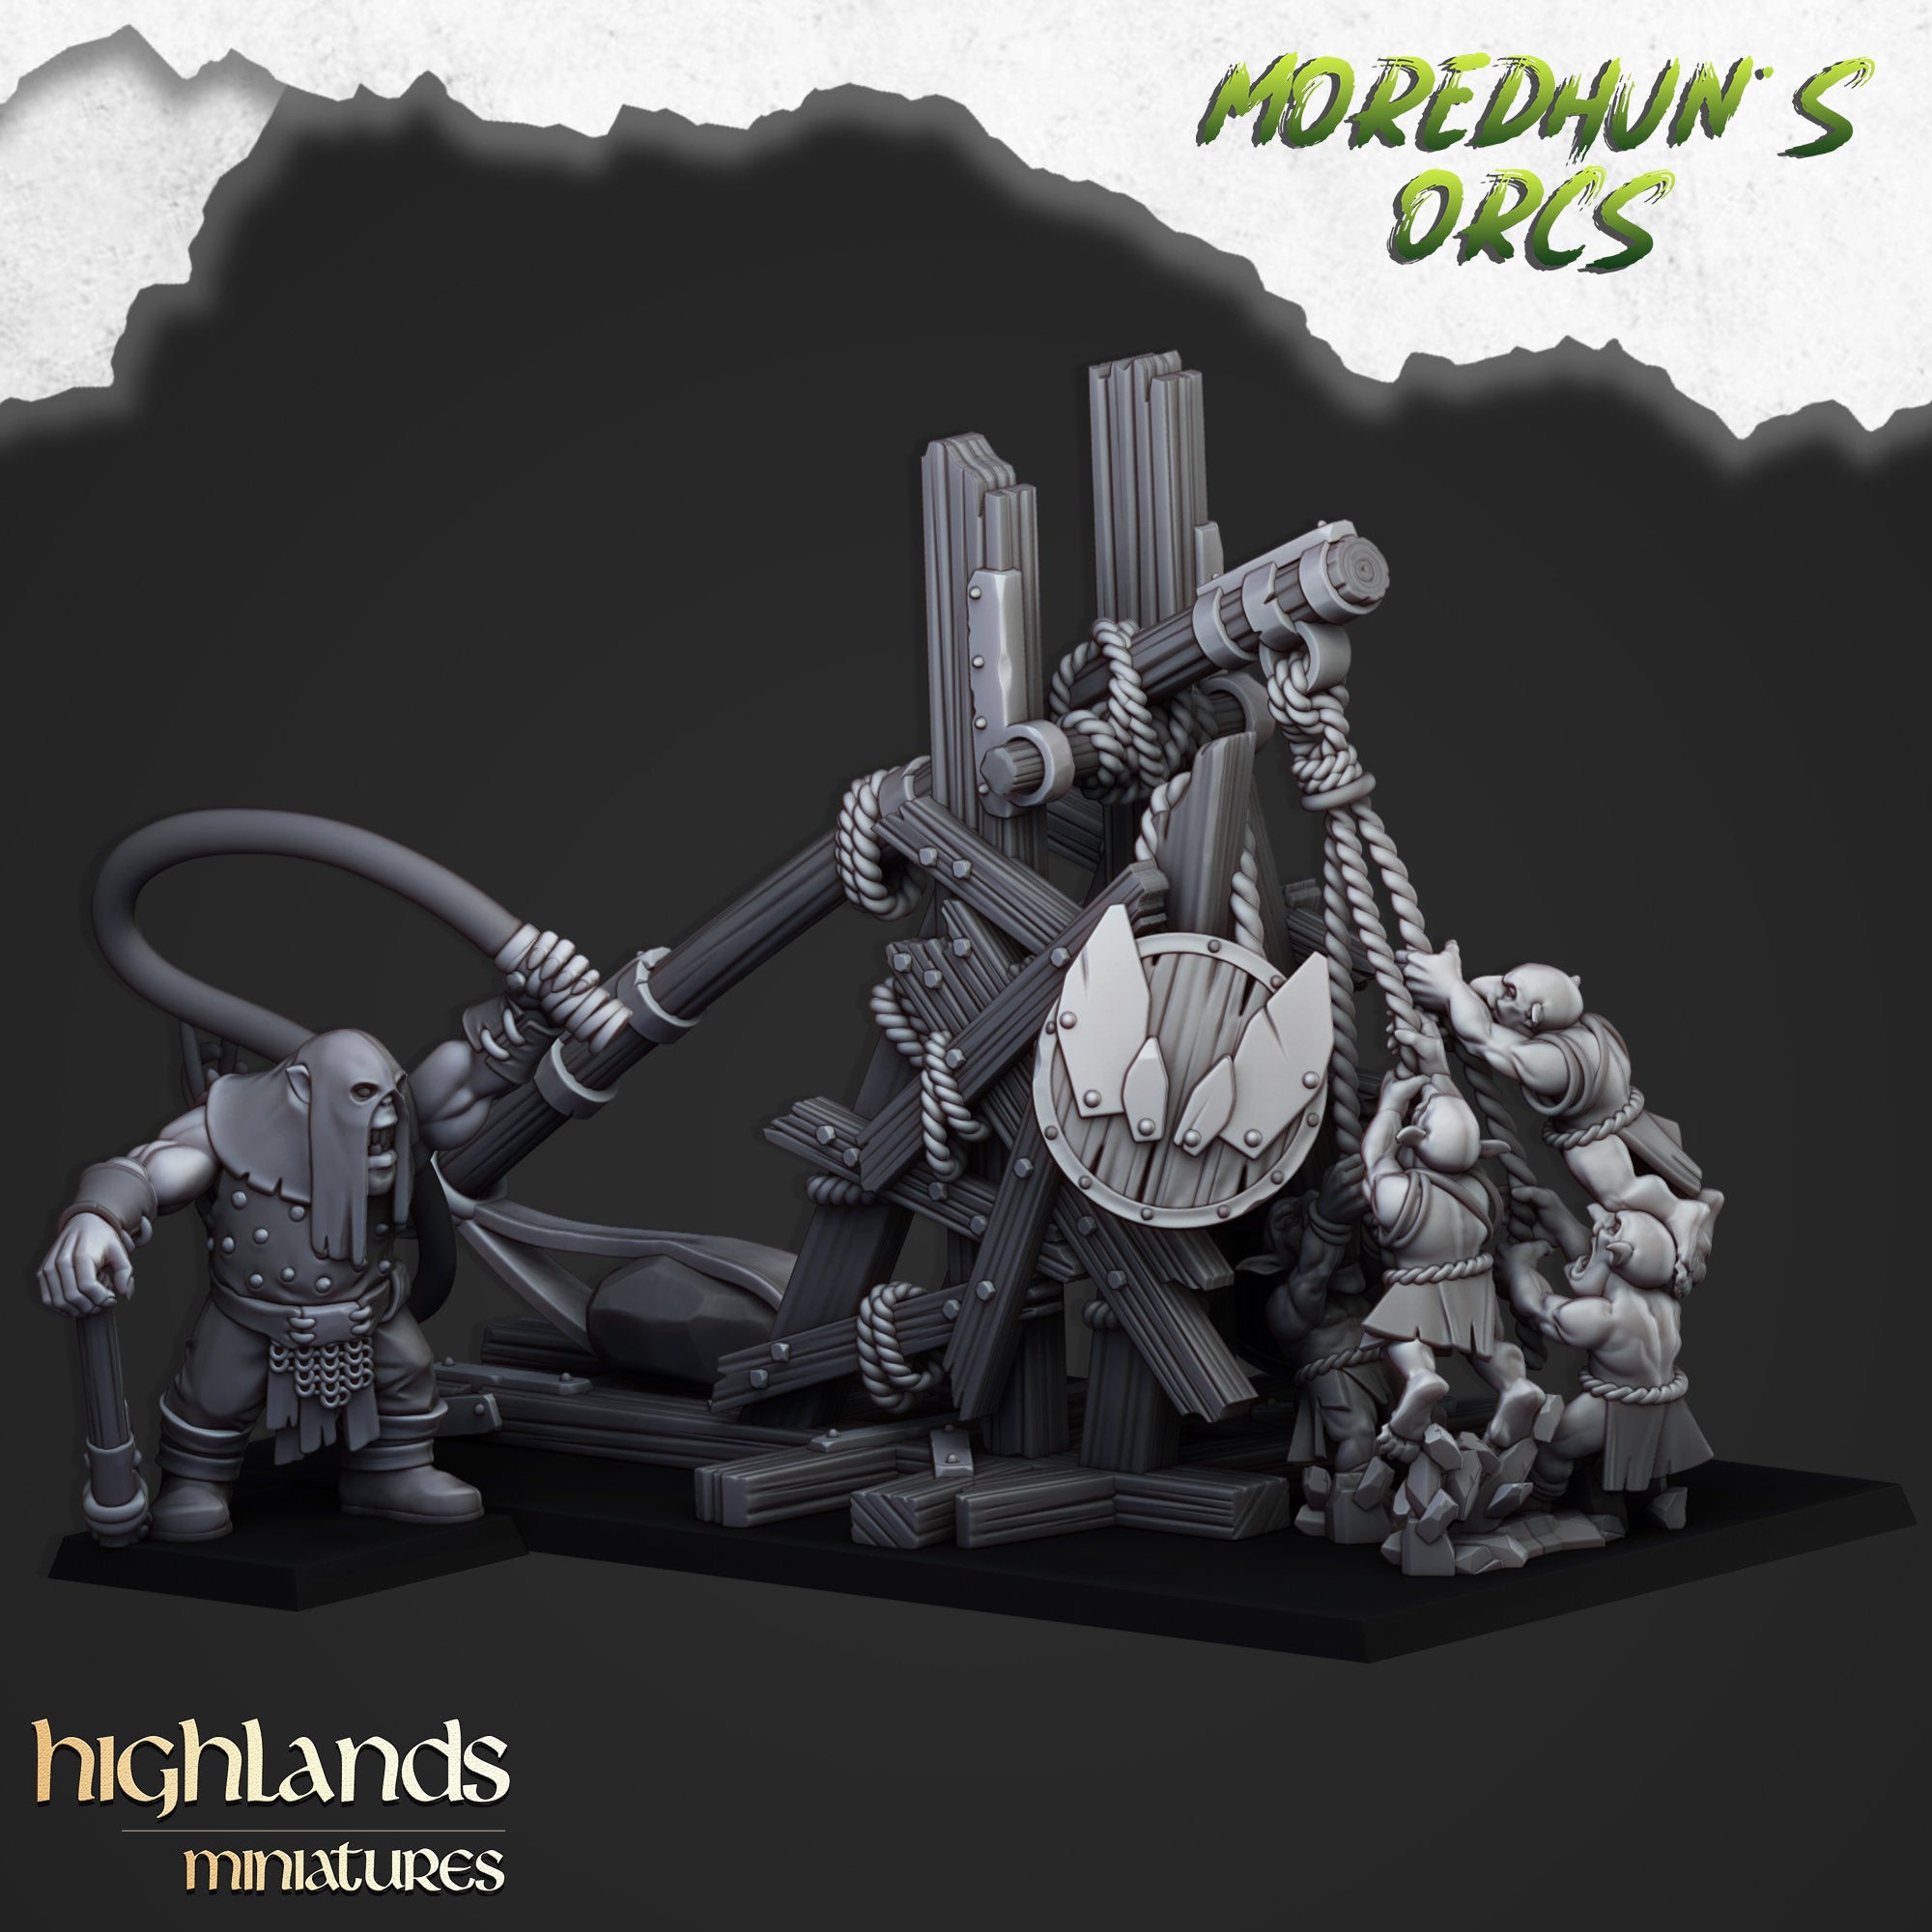 Moredhun's Orcs - Orc Stone Thrower Unit by Highlands Miniatures